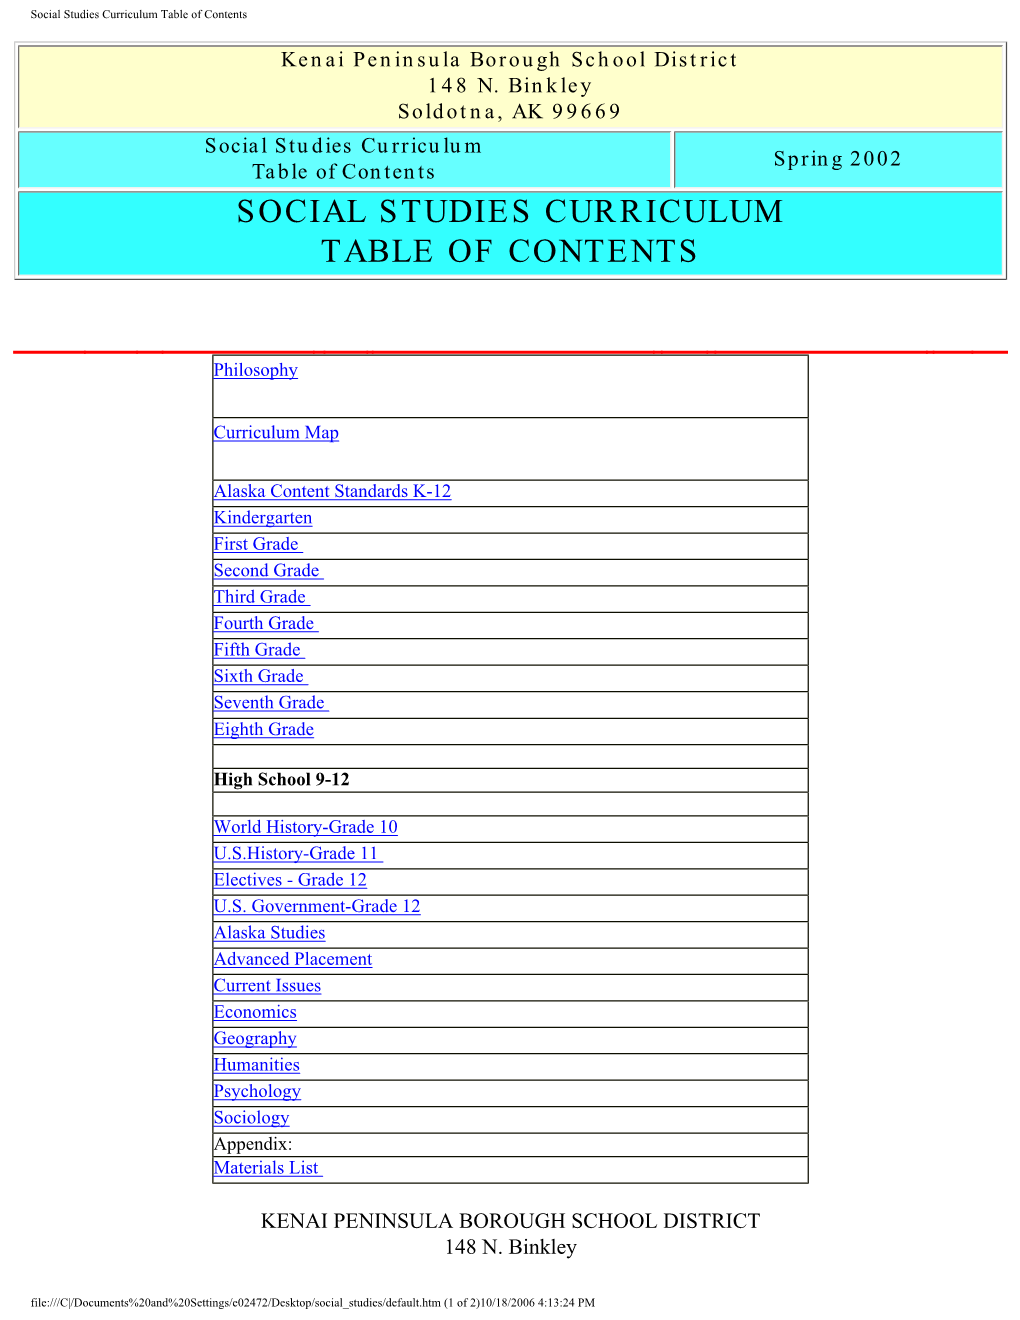 Social Studies Curriculum Table of Contents